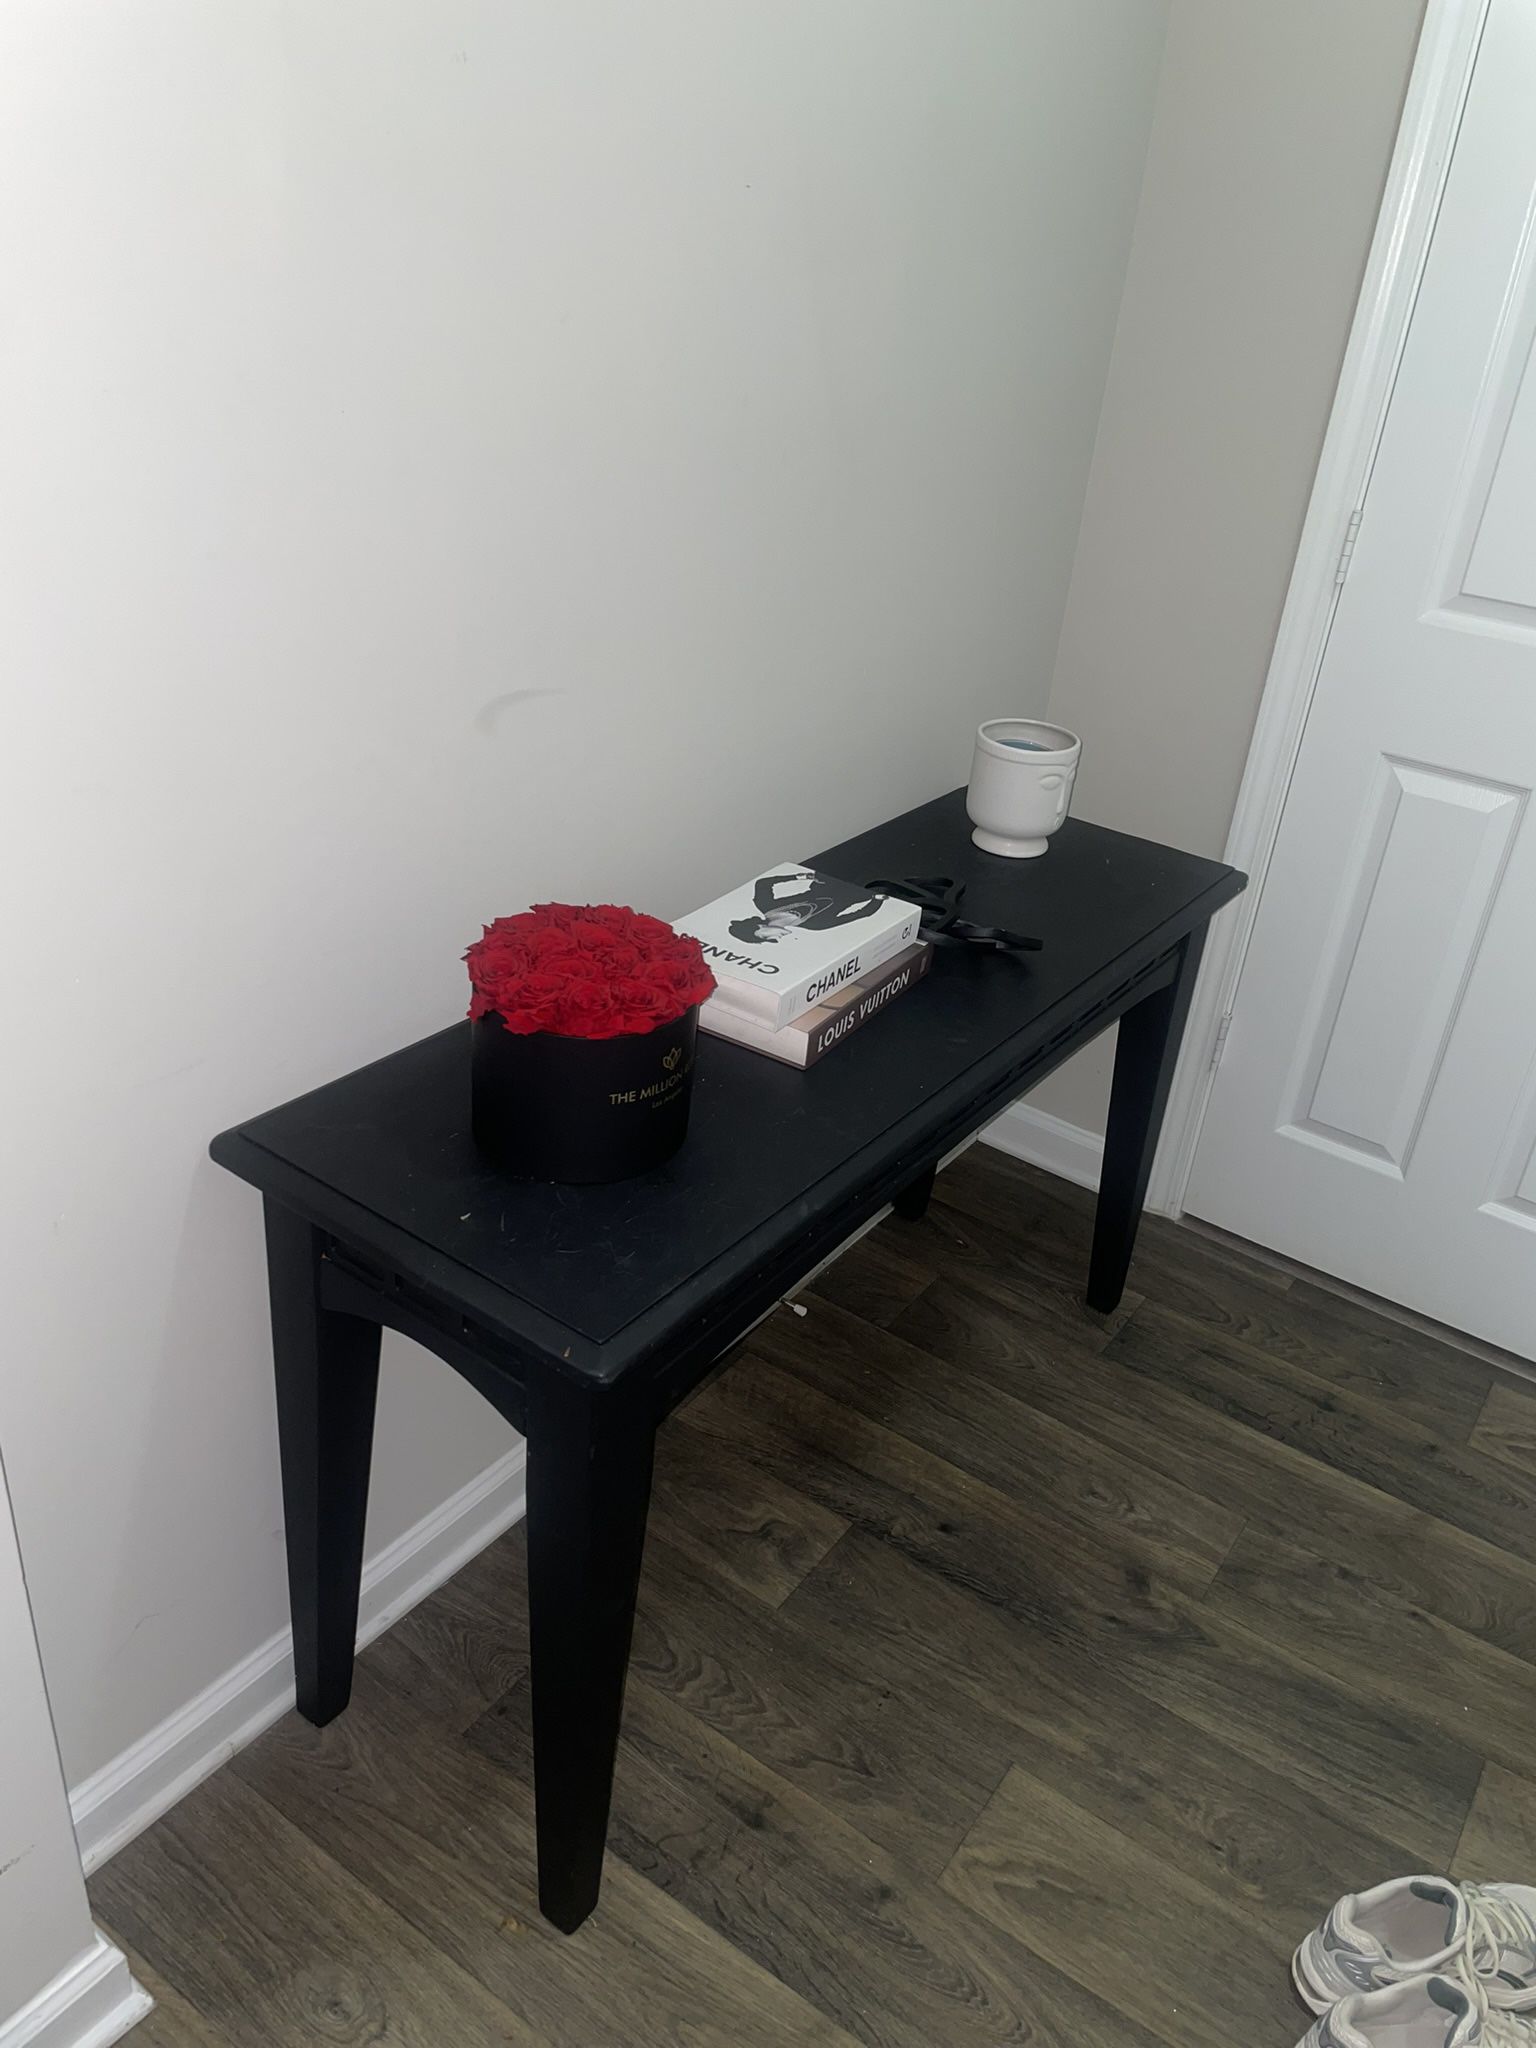 ENTRY WAY TABLE 